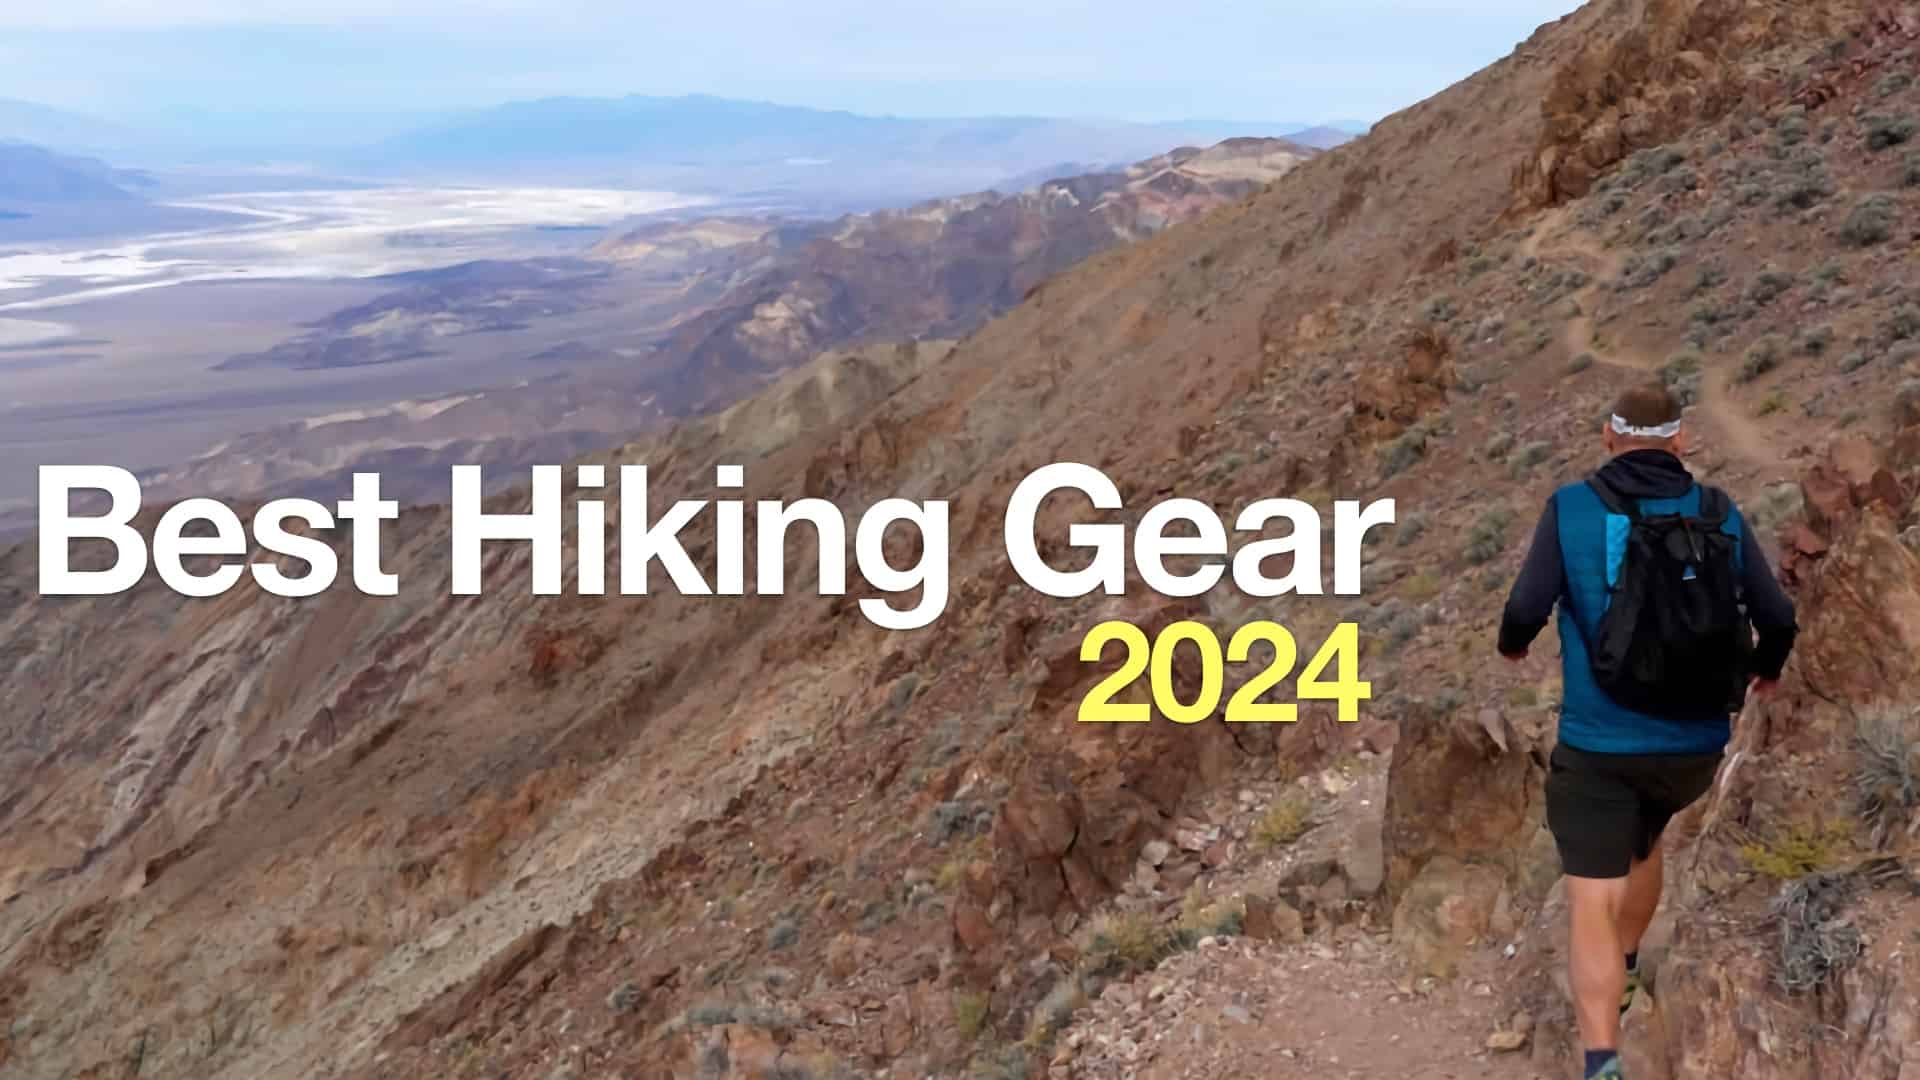 The Ultimate Hiking Gear Guide For Women - Trail to Peak